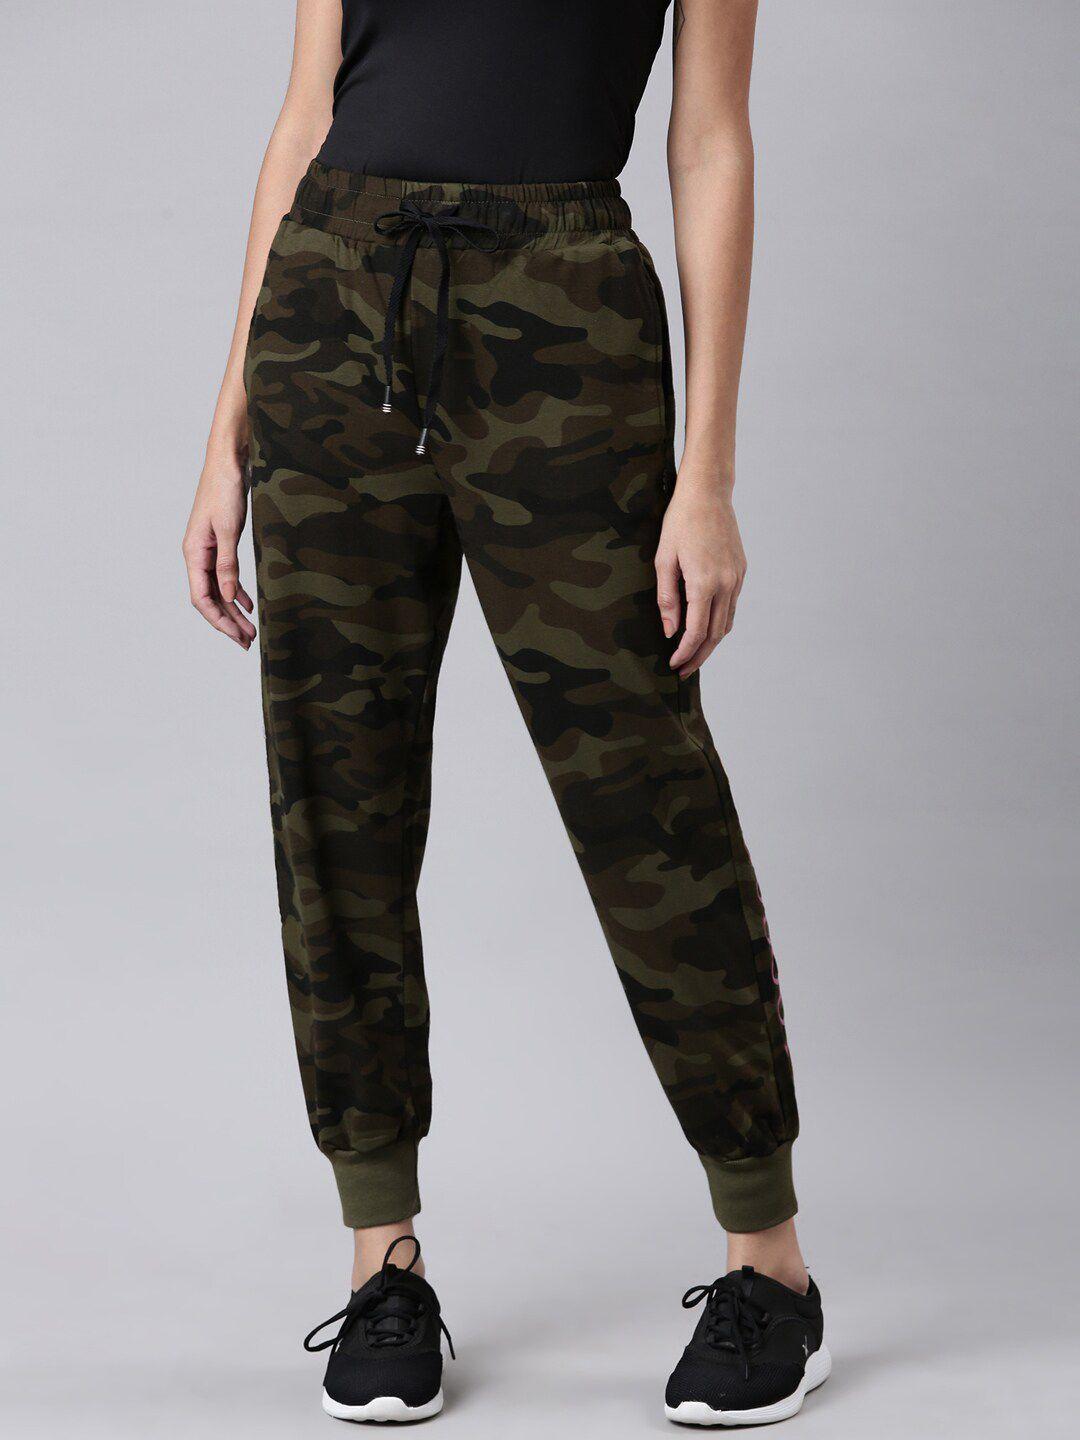 showoff-women-camouflage-printed-joggers